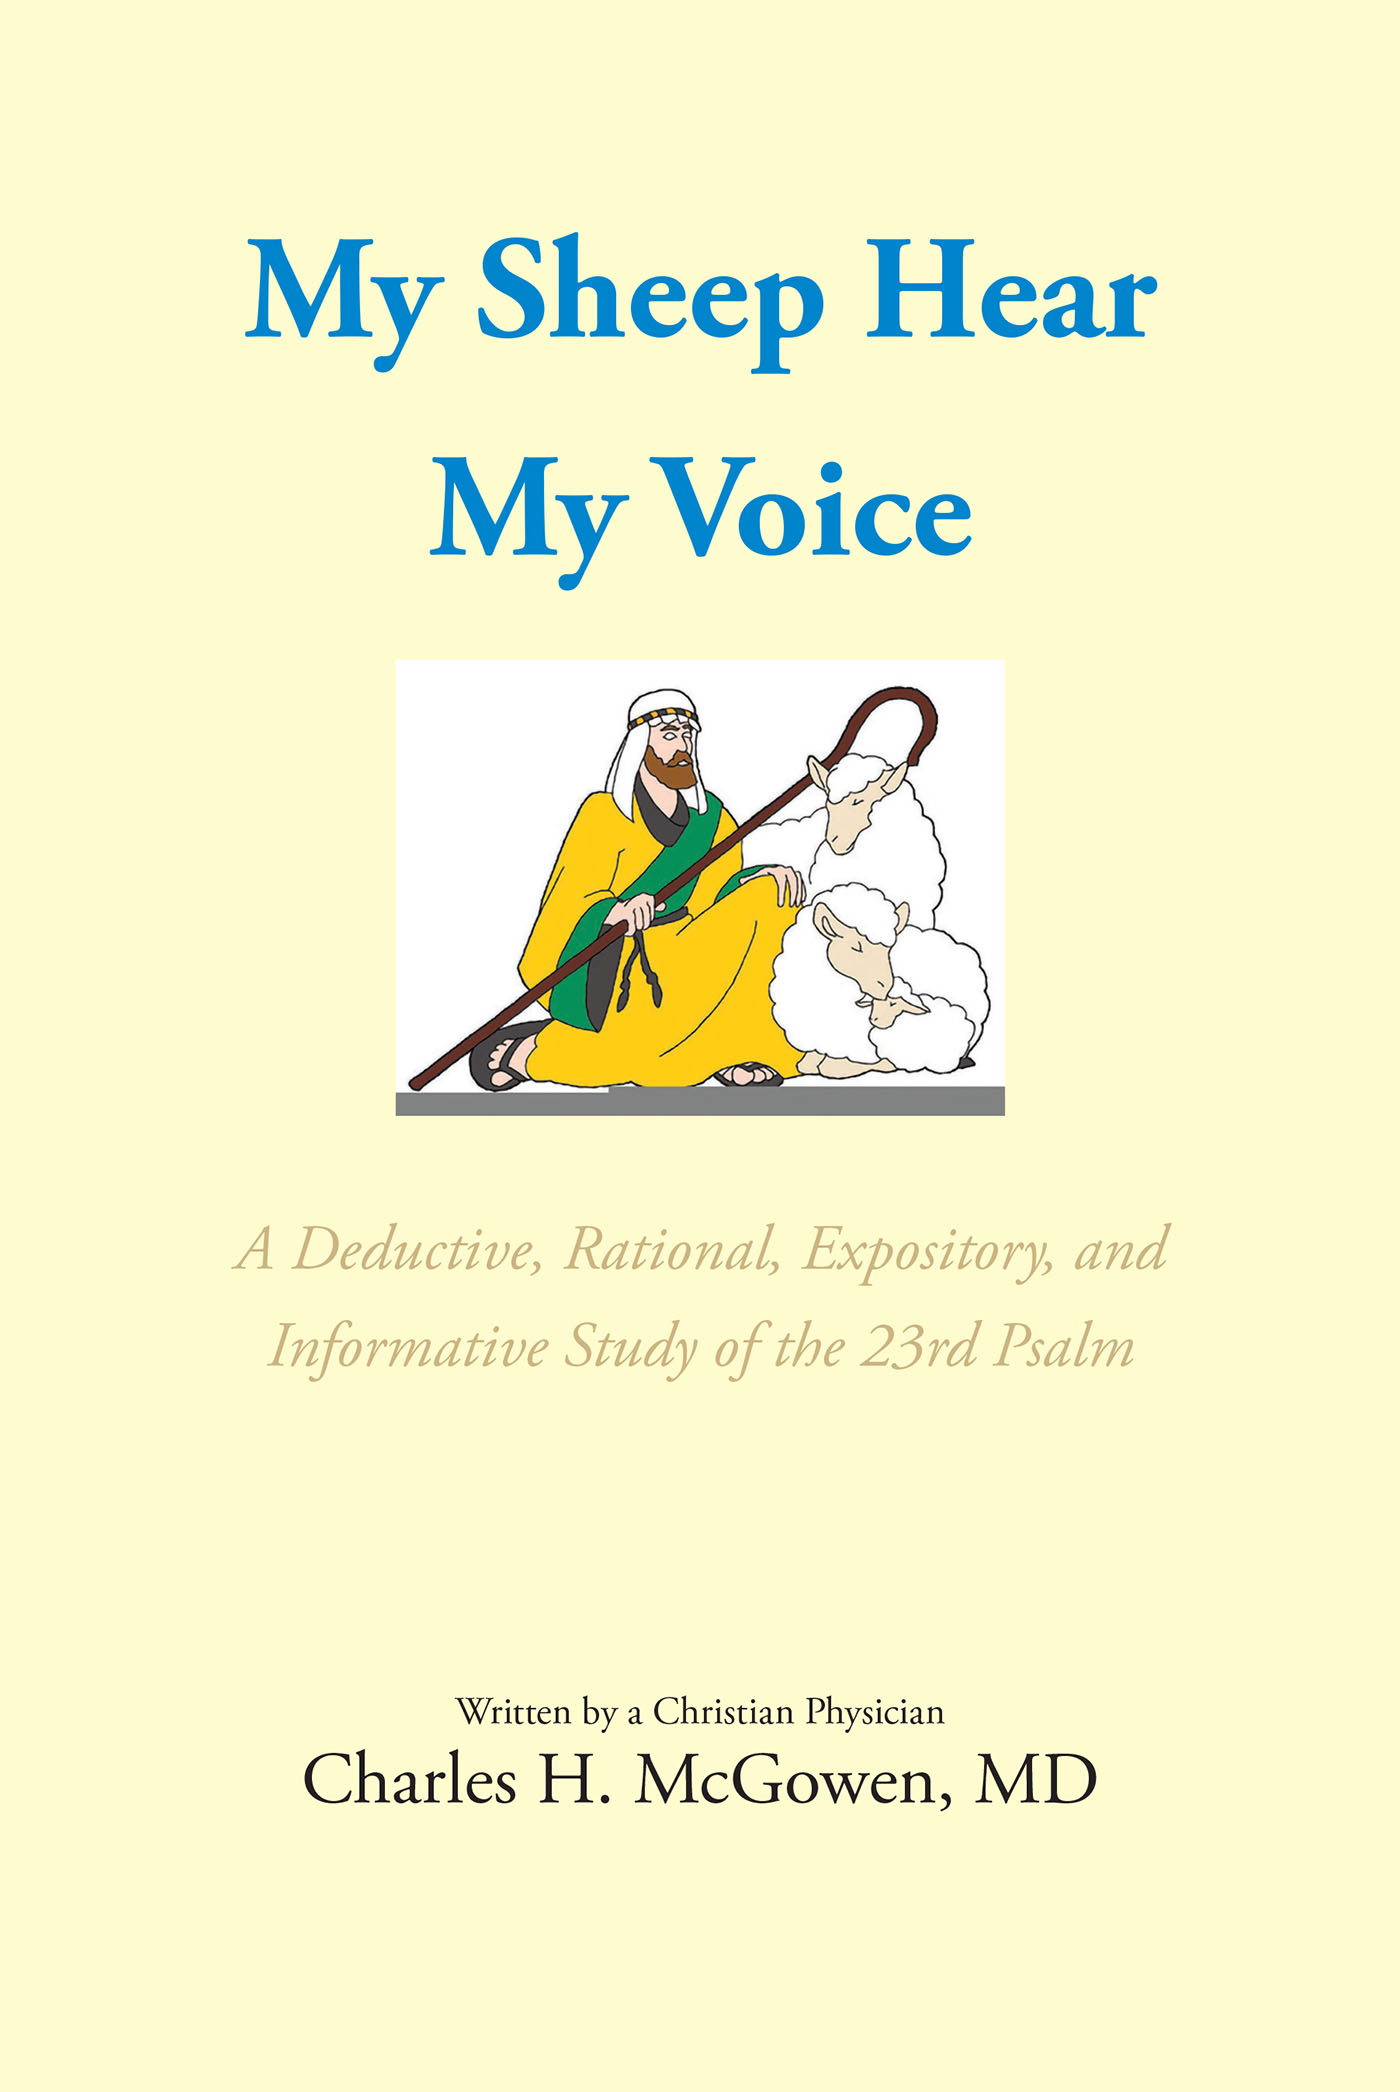 Charles H. McGowen, MD’s New Book, “My Sheep Hear My Voice,” is an In-Depth and Explorative Plunge Into the Writings of 23rd Psalm of the Bible